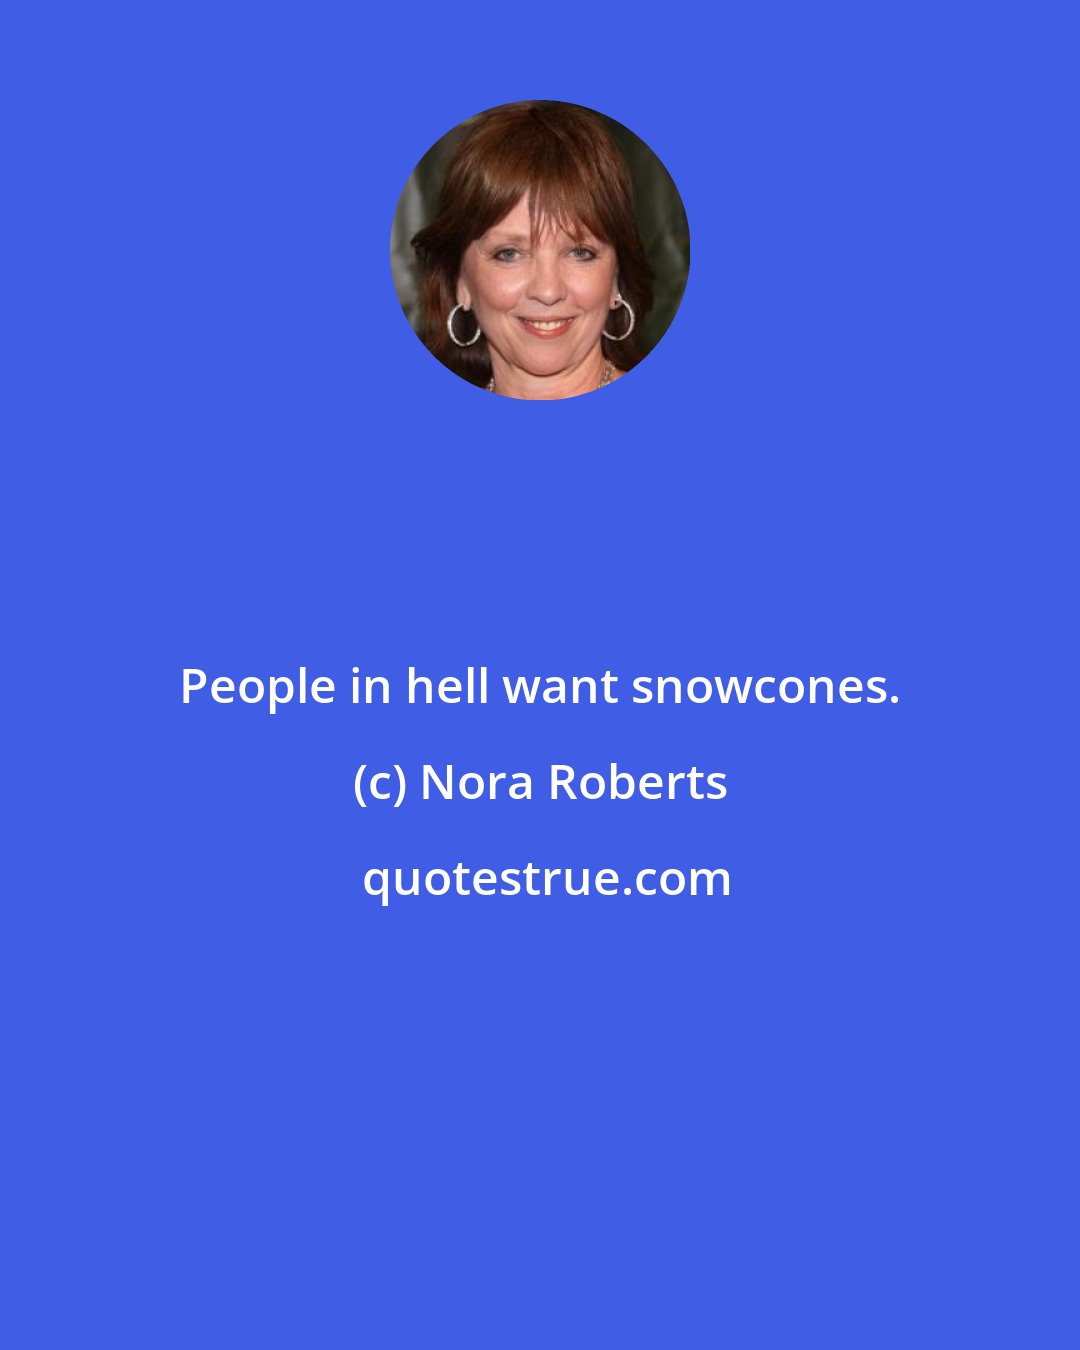 Nora Roberts: People in hell want snowcones.